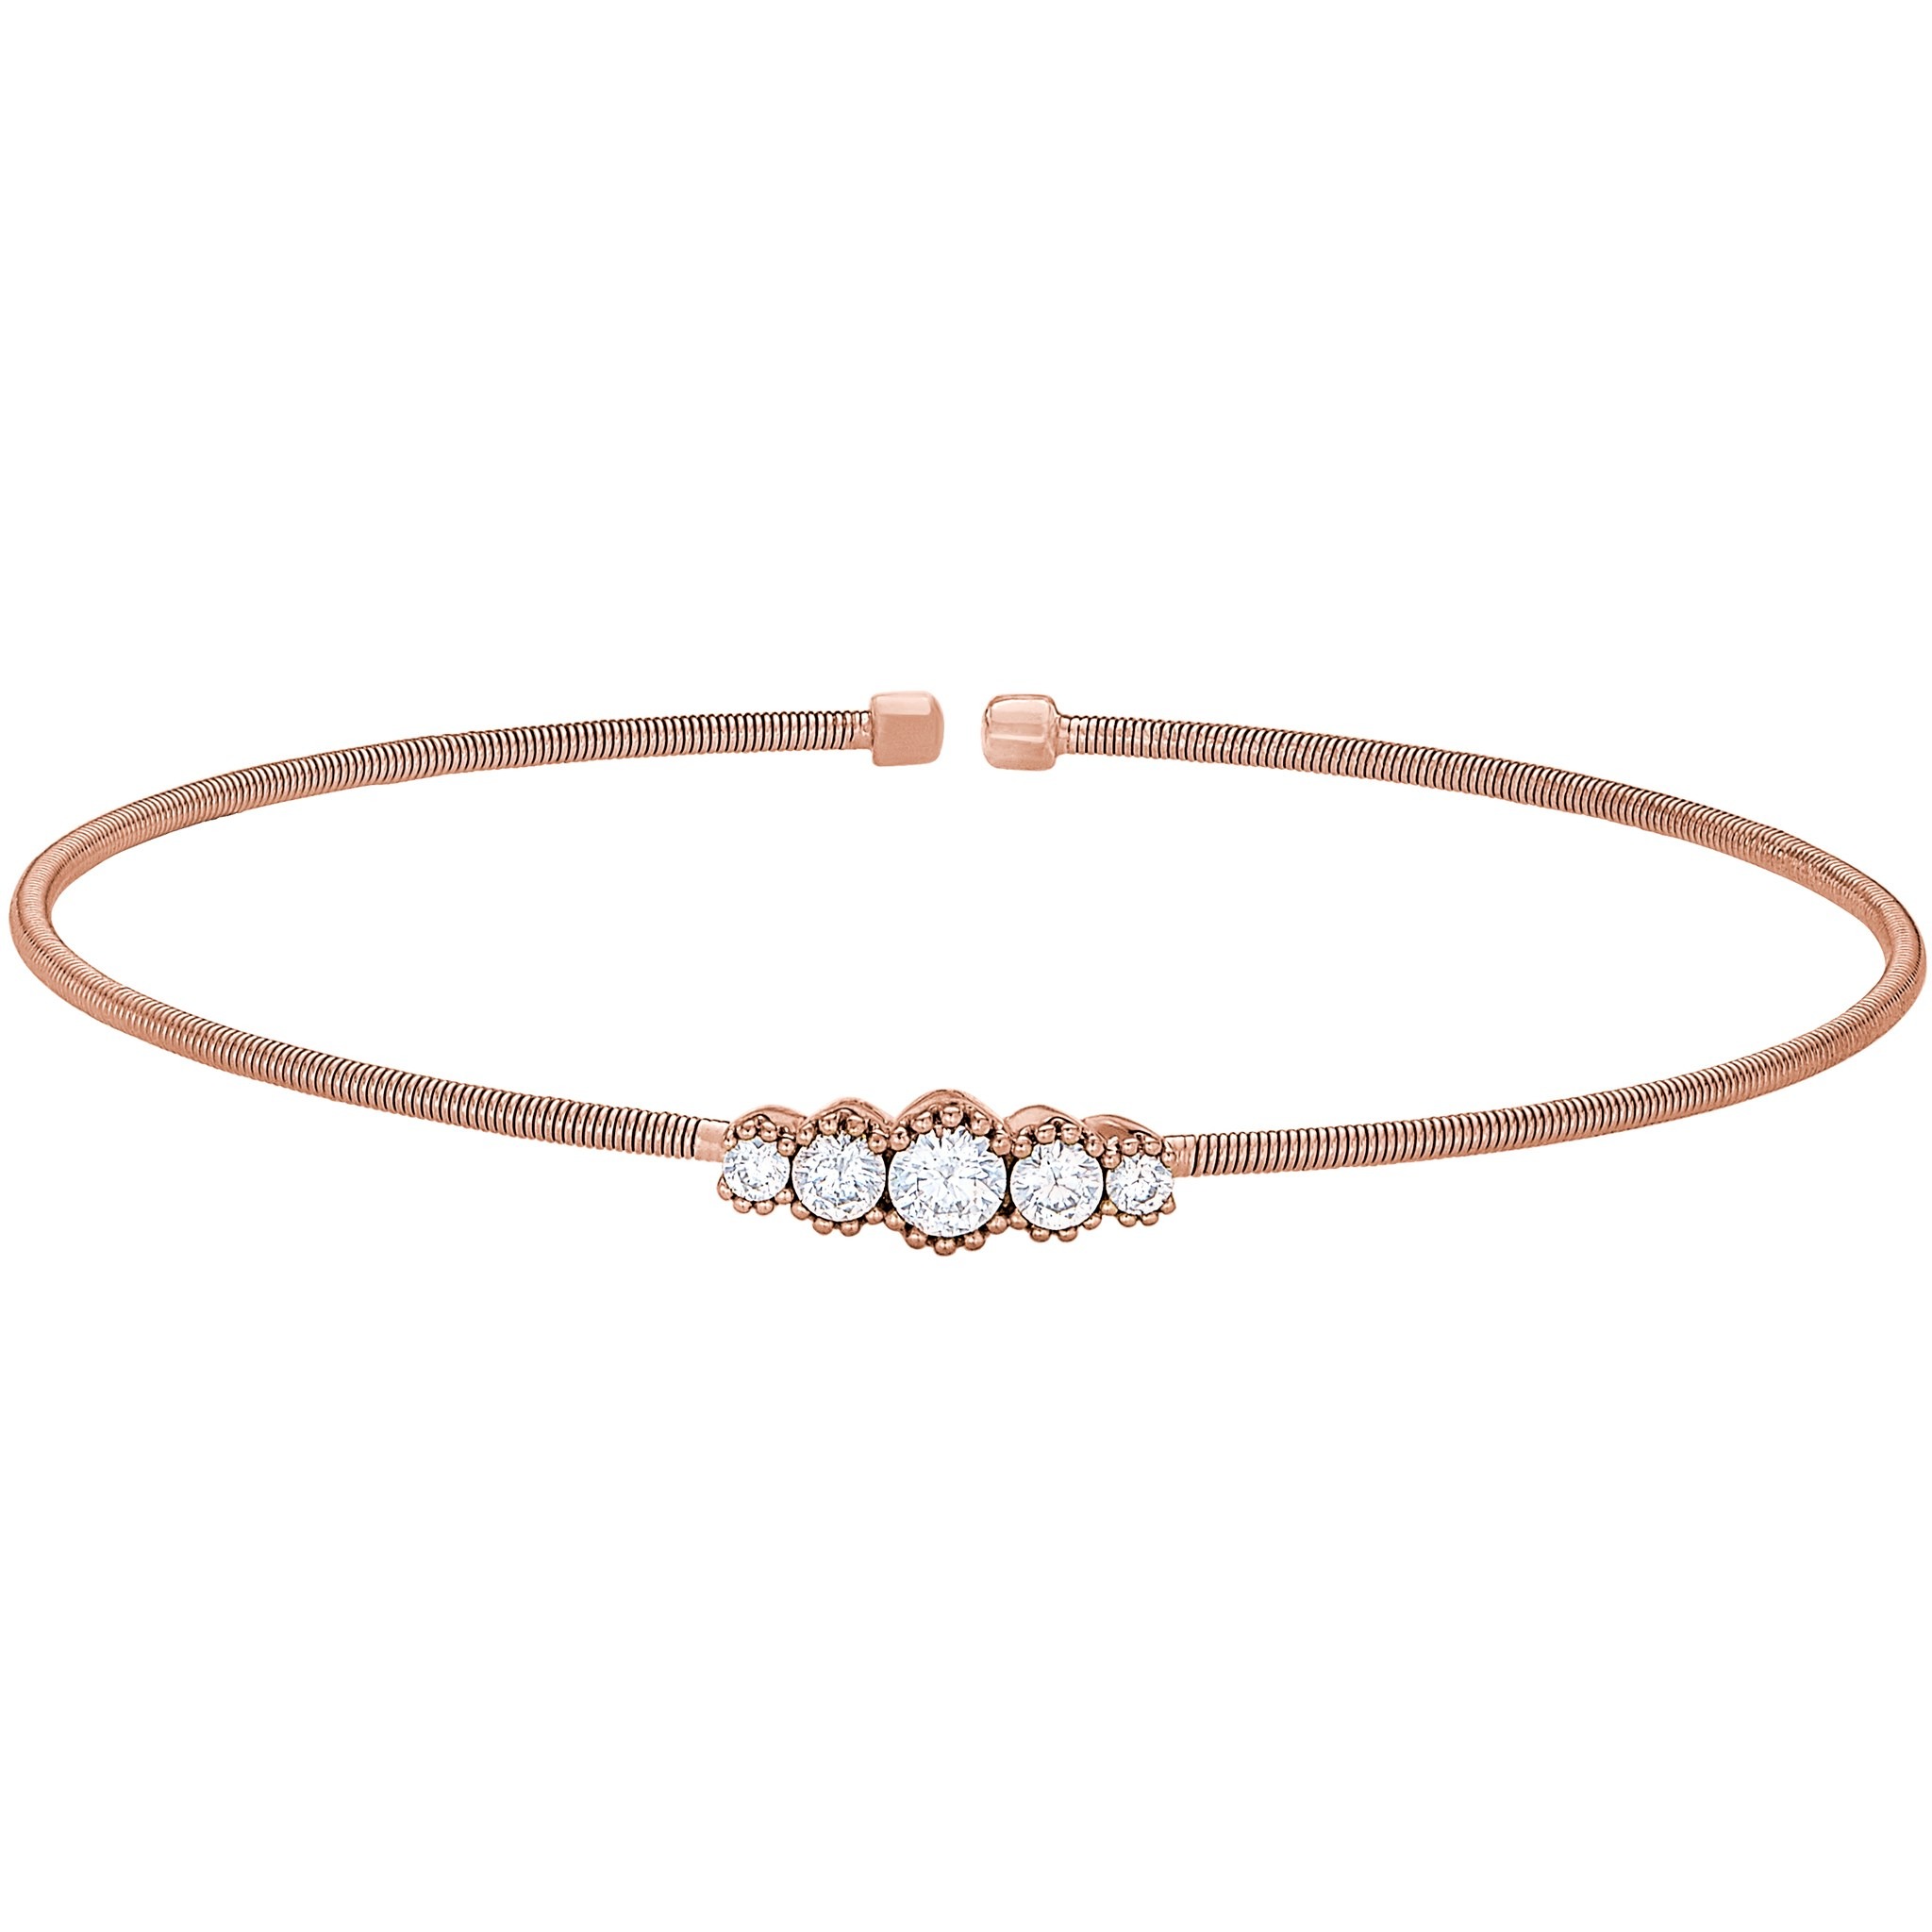 Rose Gold Finish Sterling Silver Cable Cuff Bracelet with Graduated Five Stone